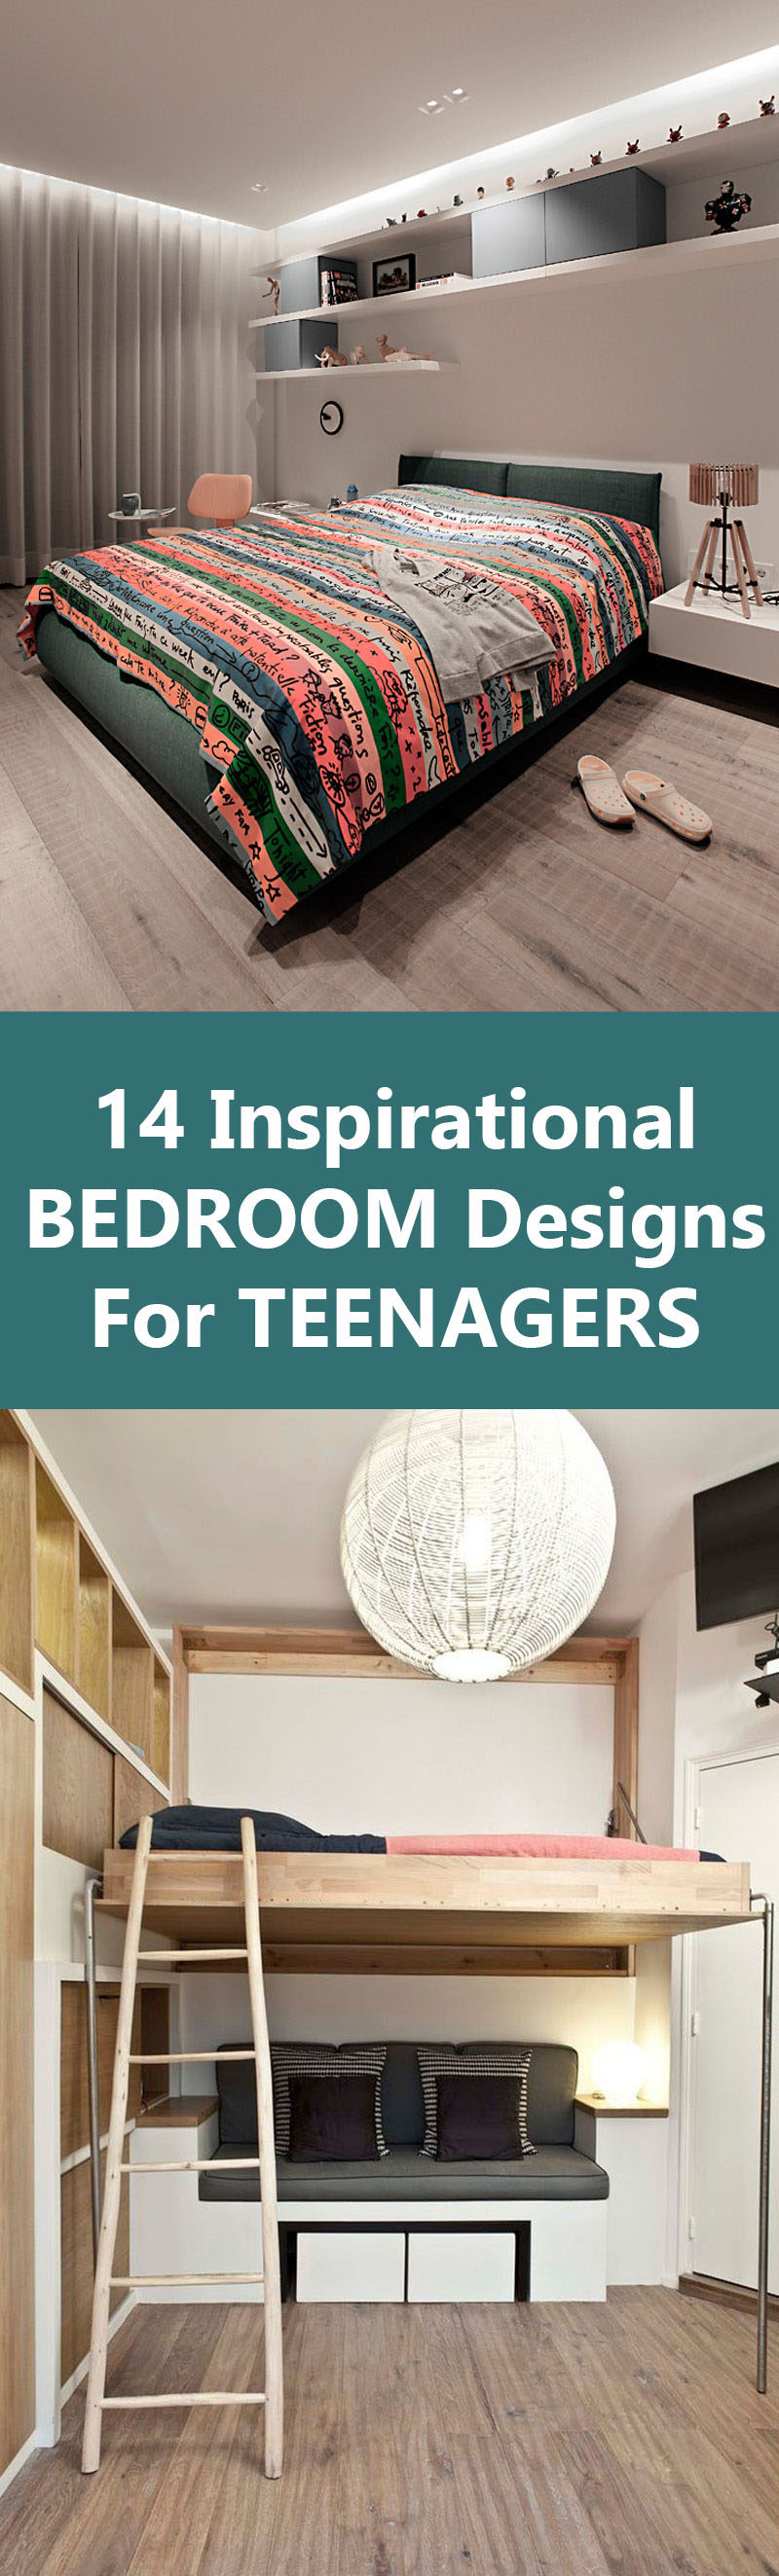 14 Inspirational Bedrooms For Teenagers